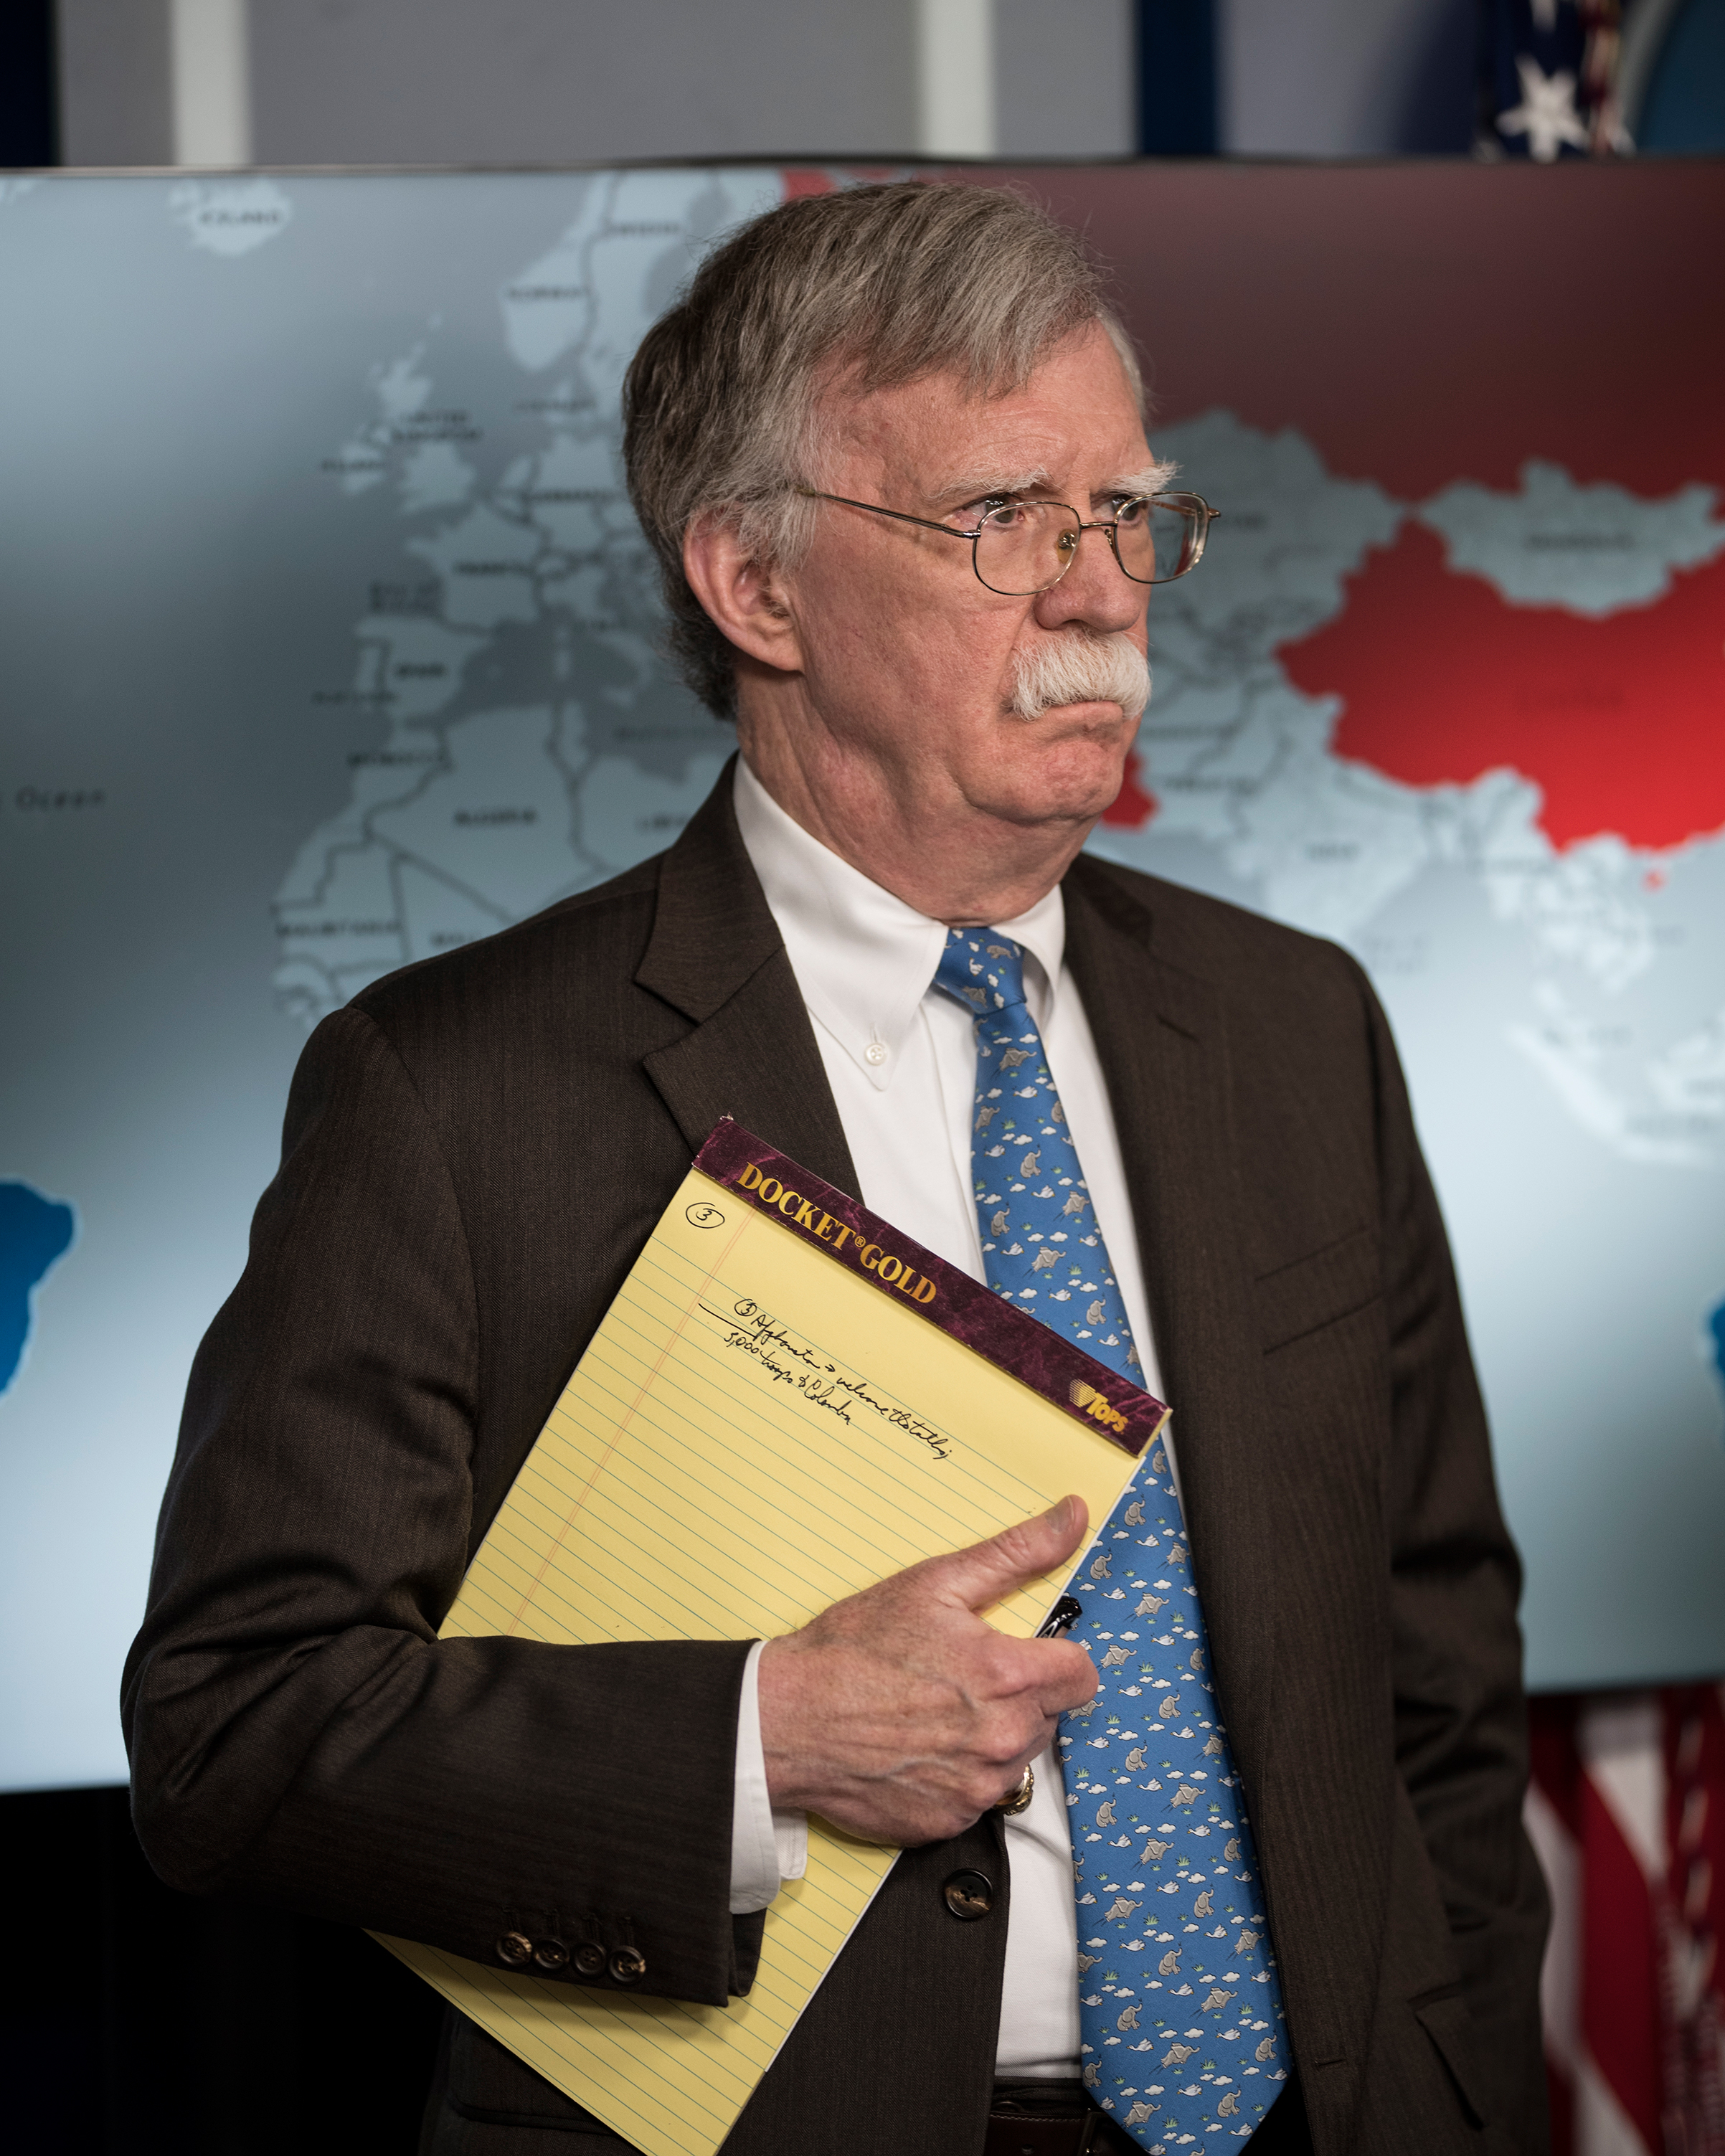 National security adviser John Bolton during a White House press briefing in Washington, D.C., on Jan. 28, 2019. (David Butow—Redux for TIME)